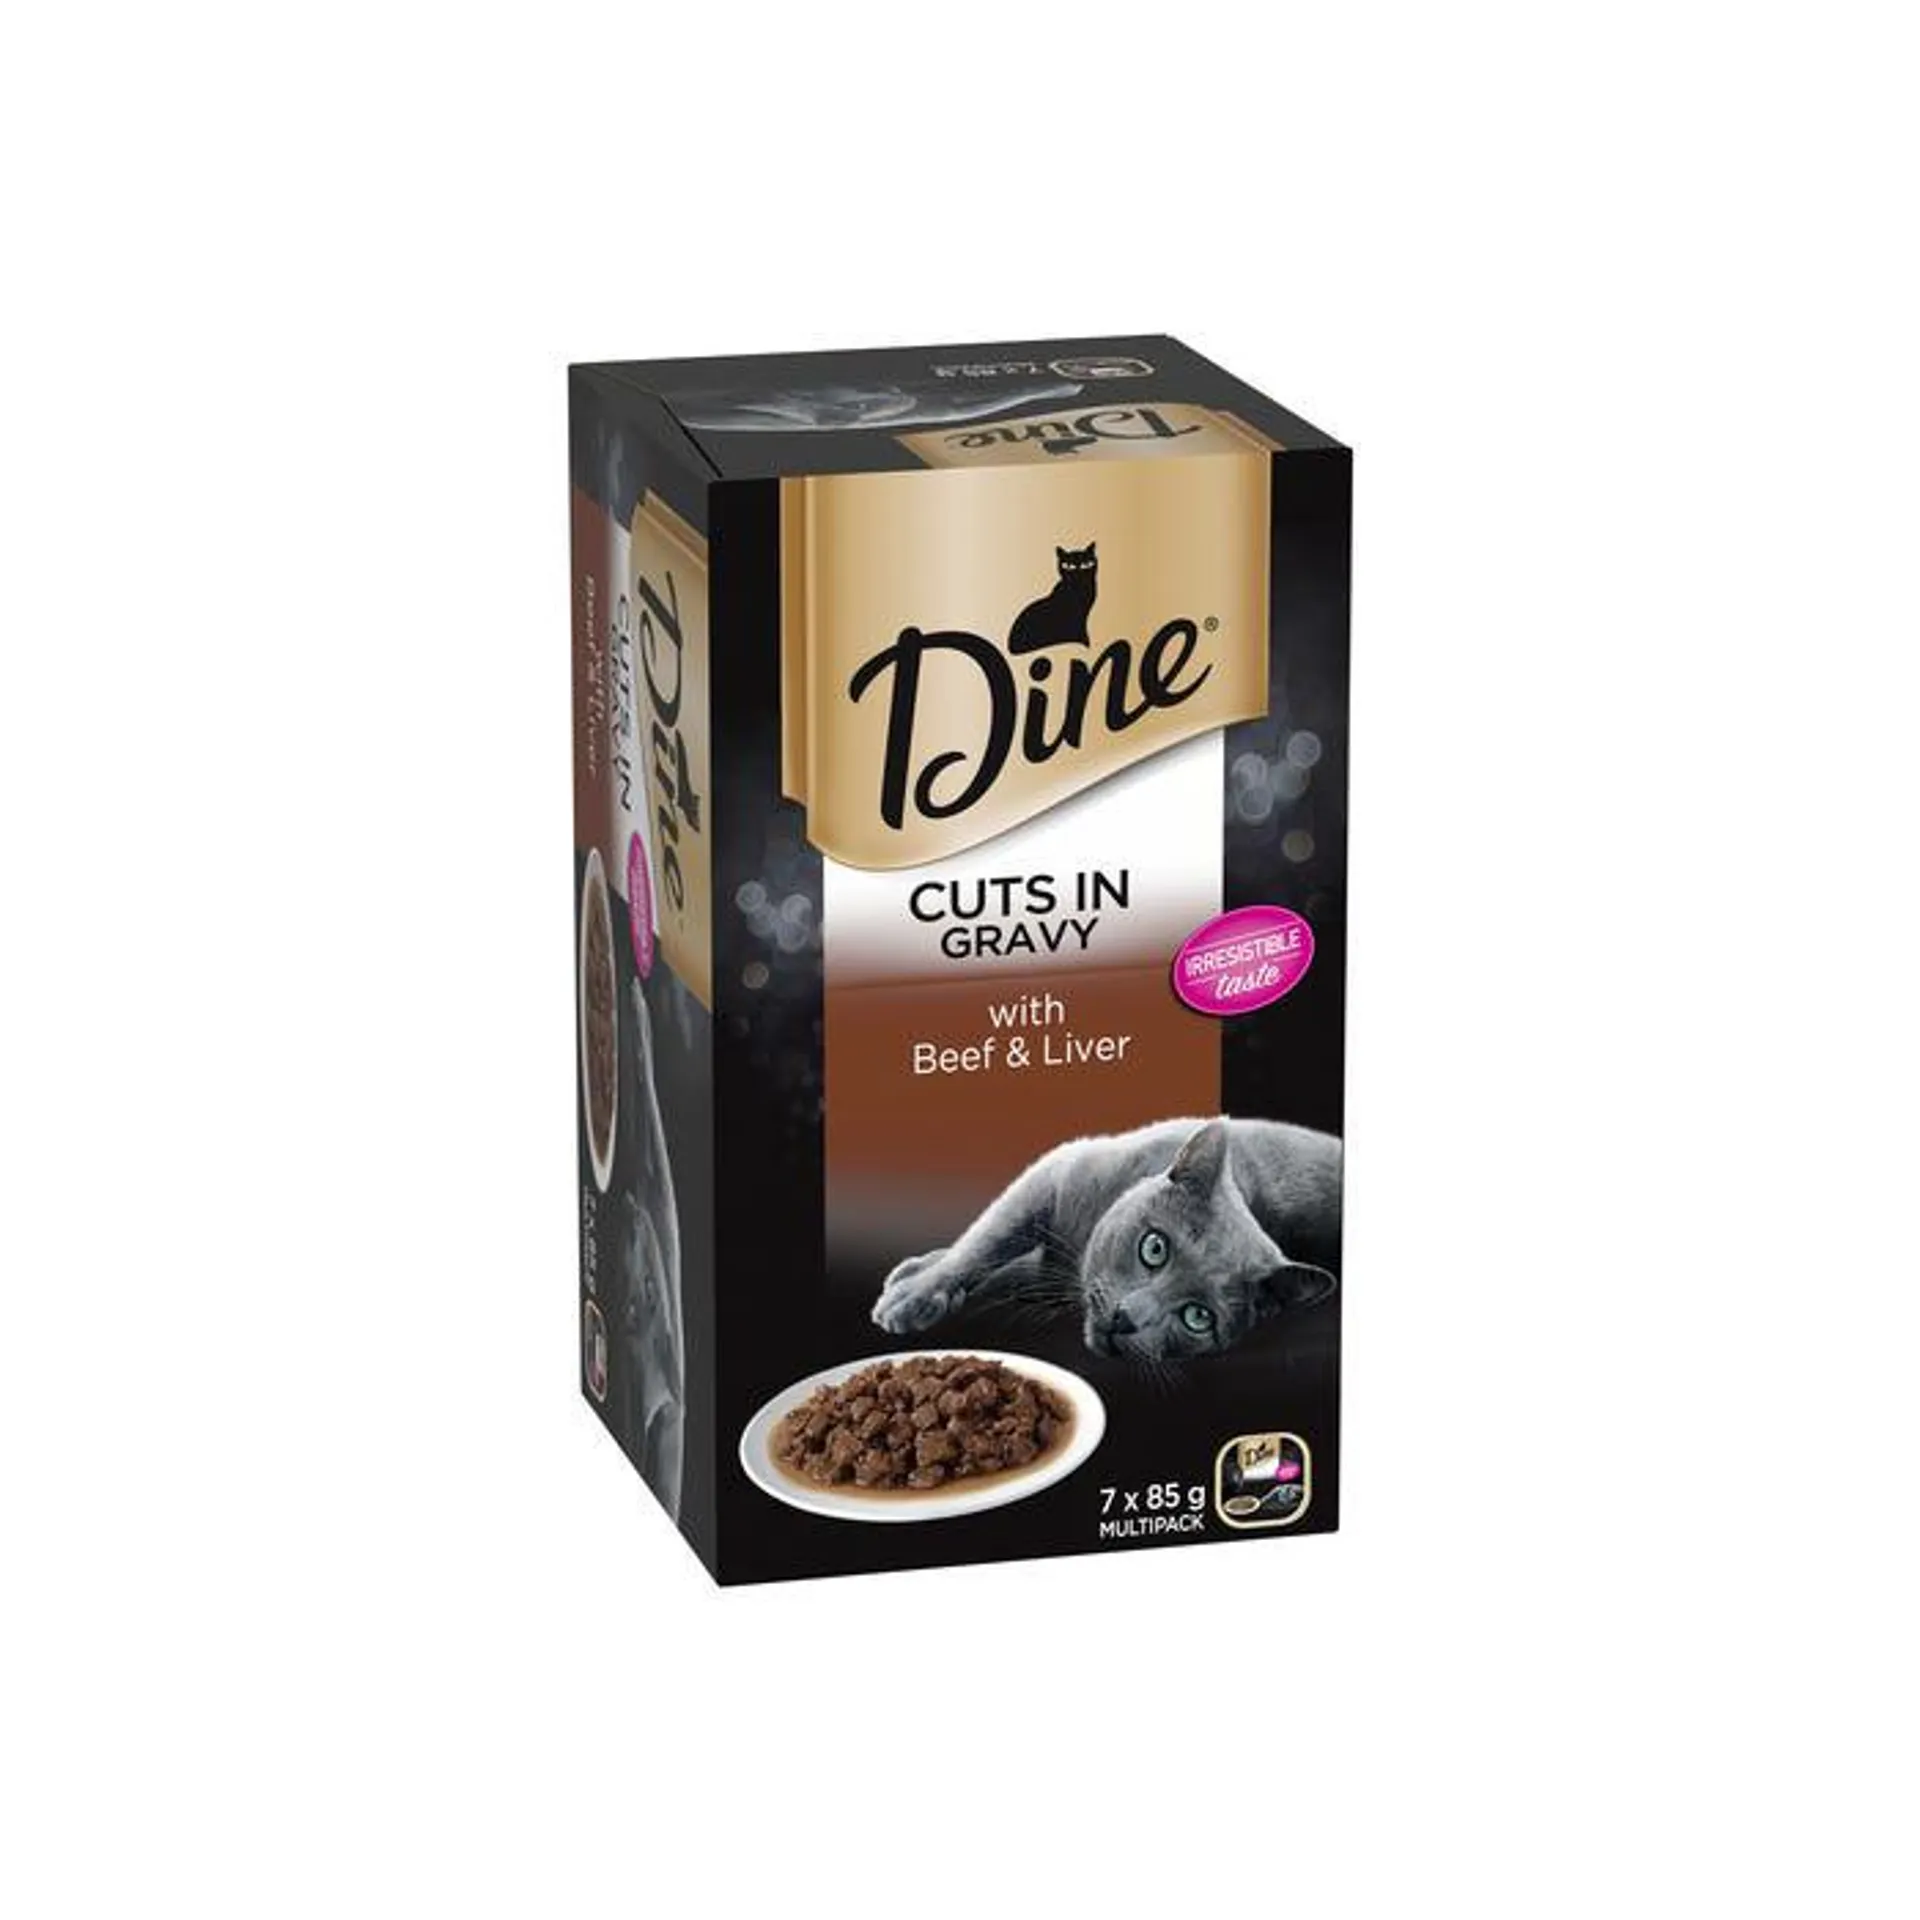 Dine Daily Cuts In Gravy With Beef & Liver Cat Food 85g 7 Pack